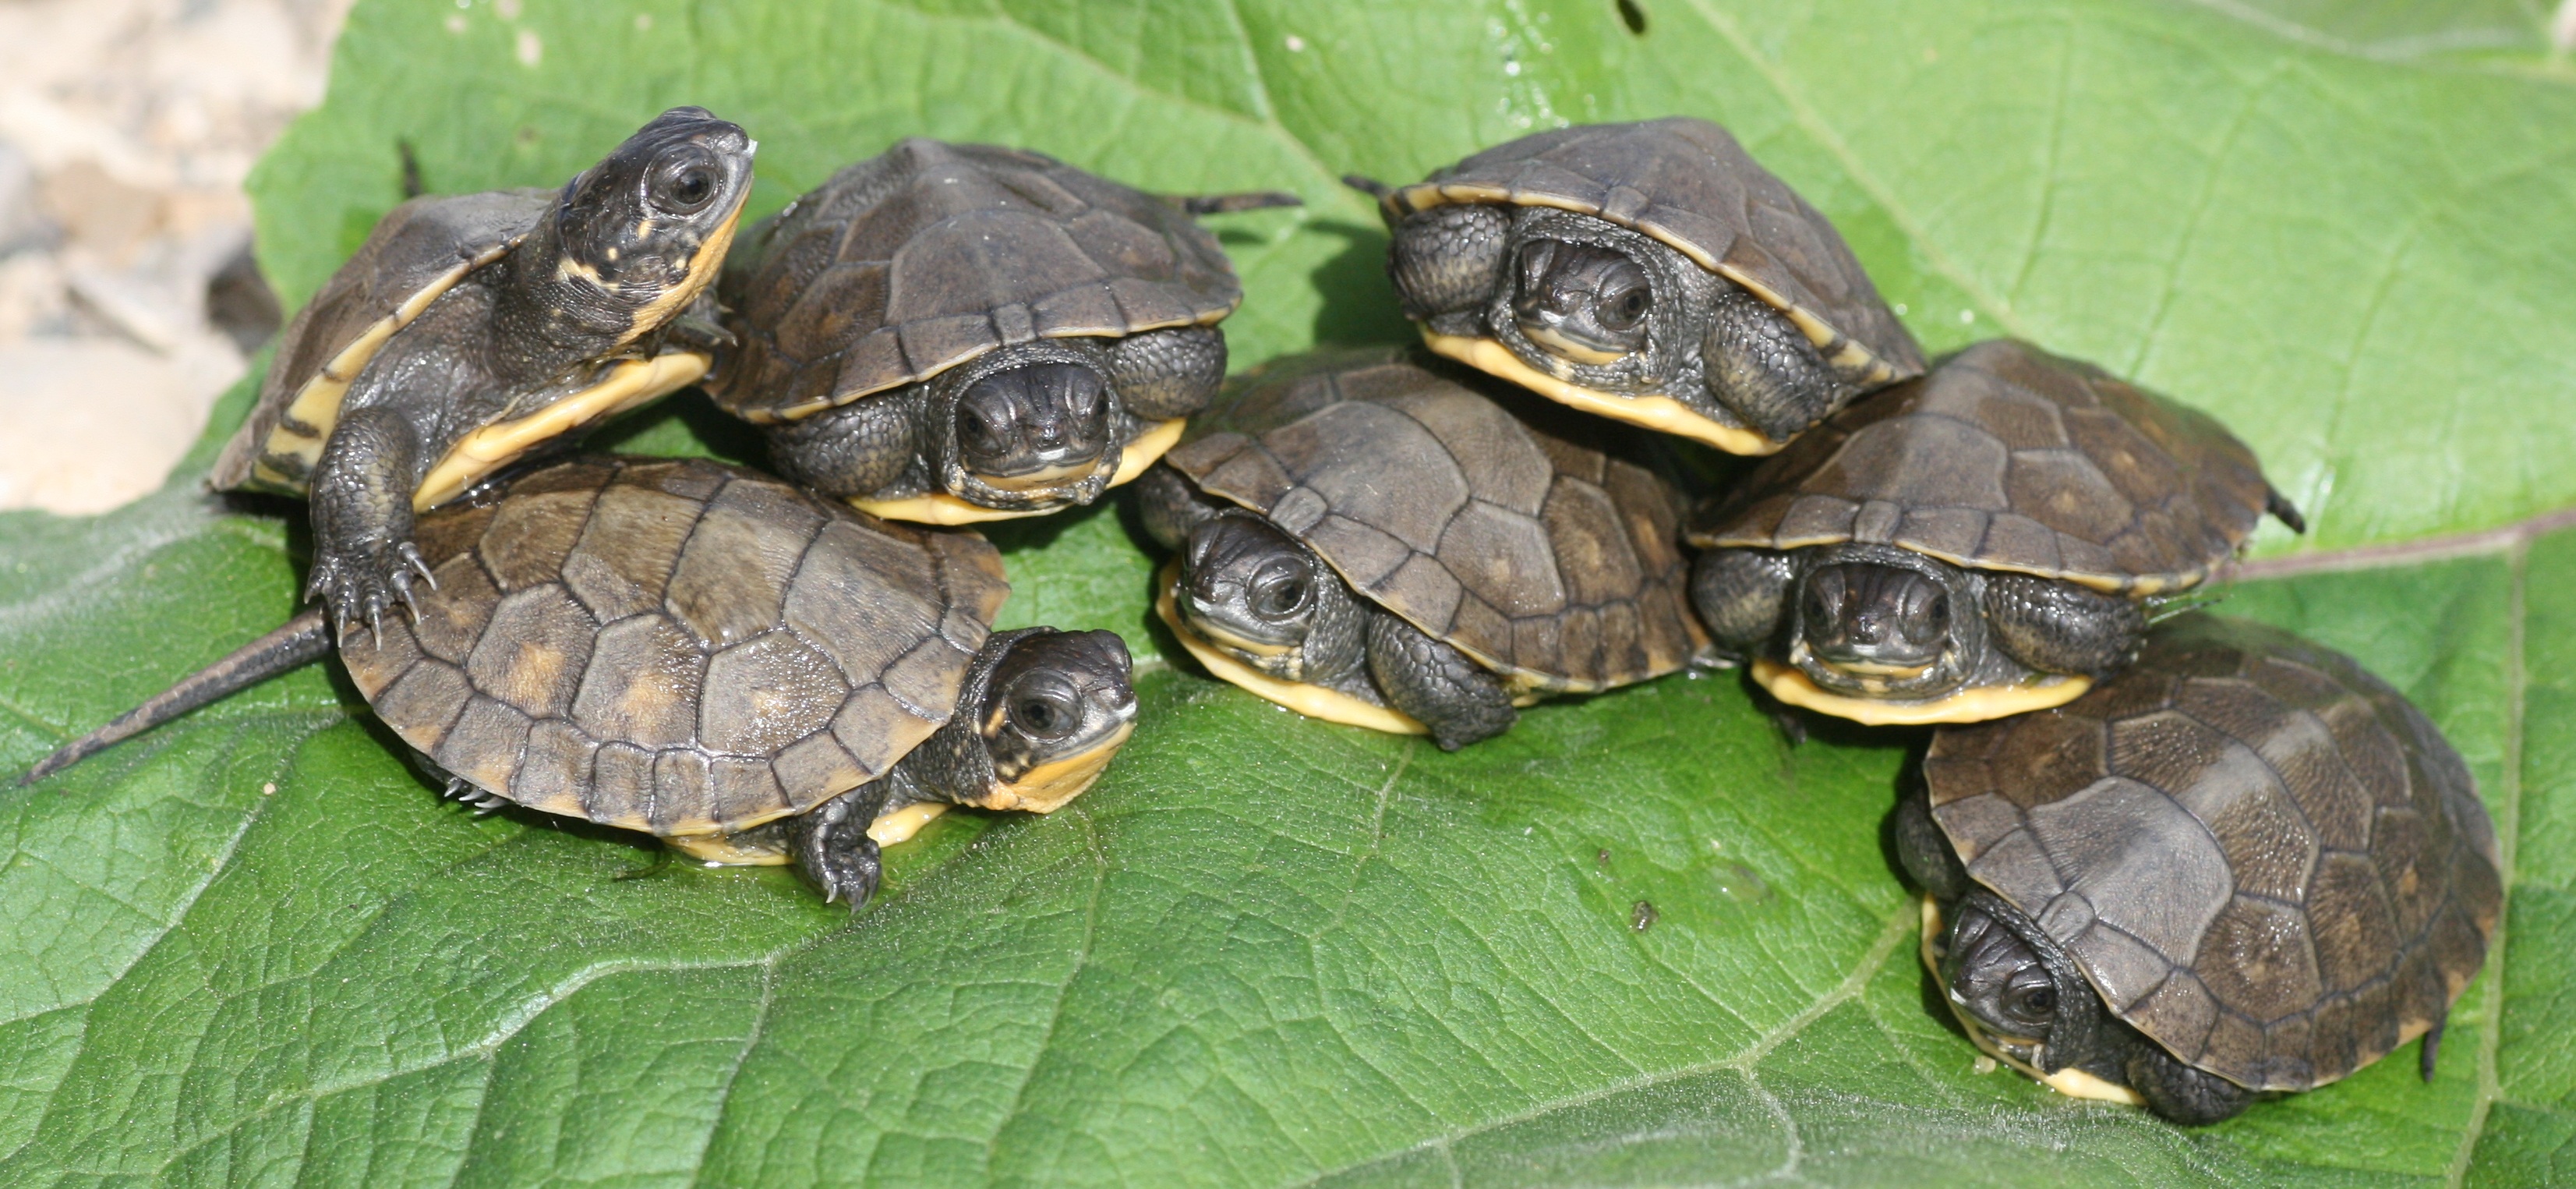 Turtles Are Tops Is Back Adopt A Pond News